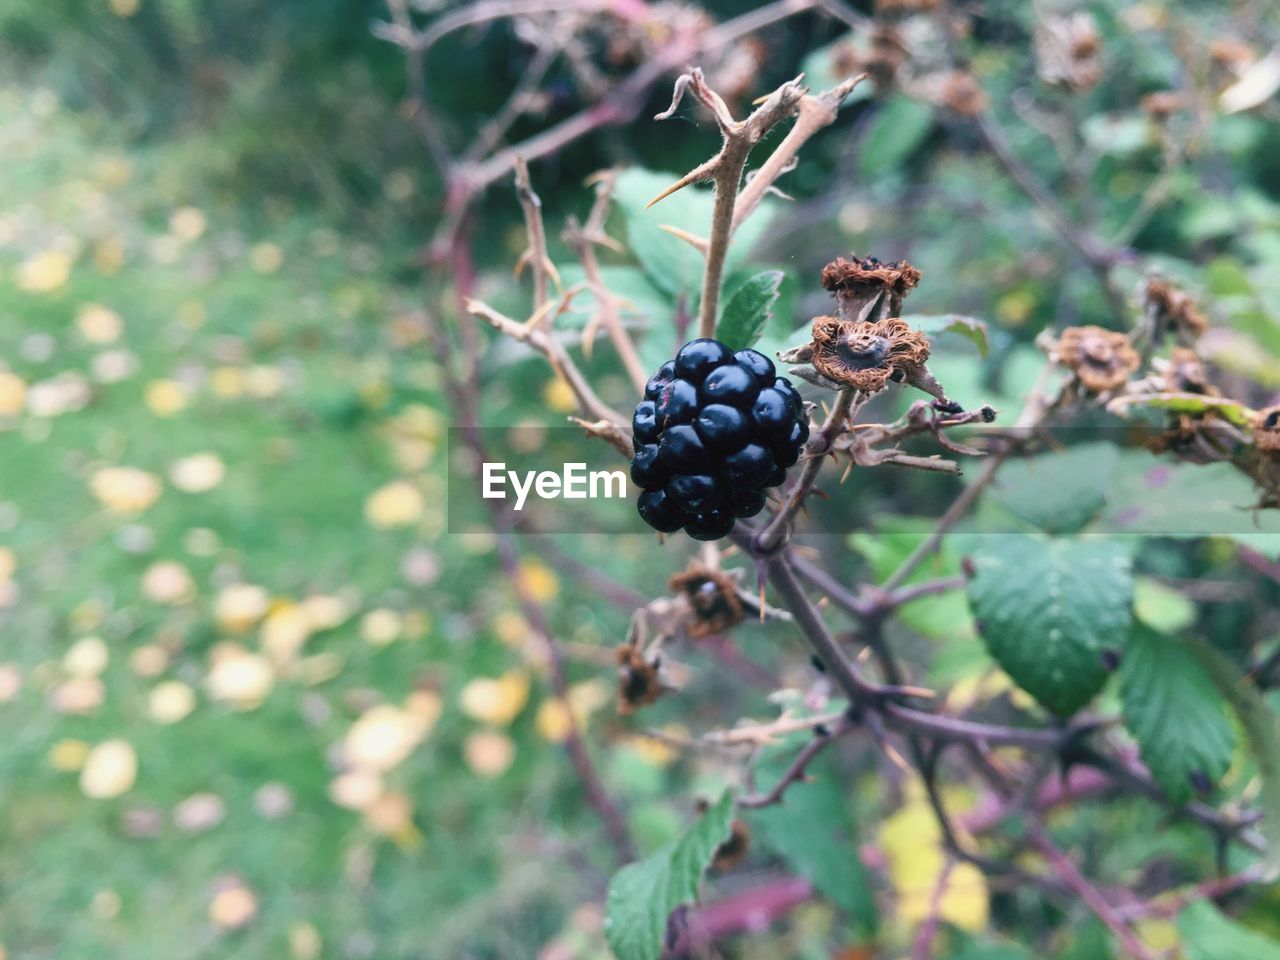 Close-up of black berry fruit on dry twig